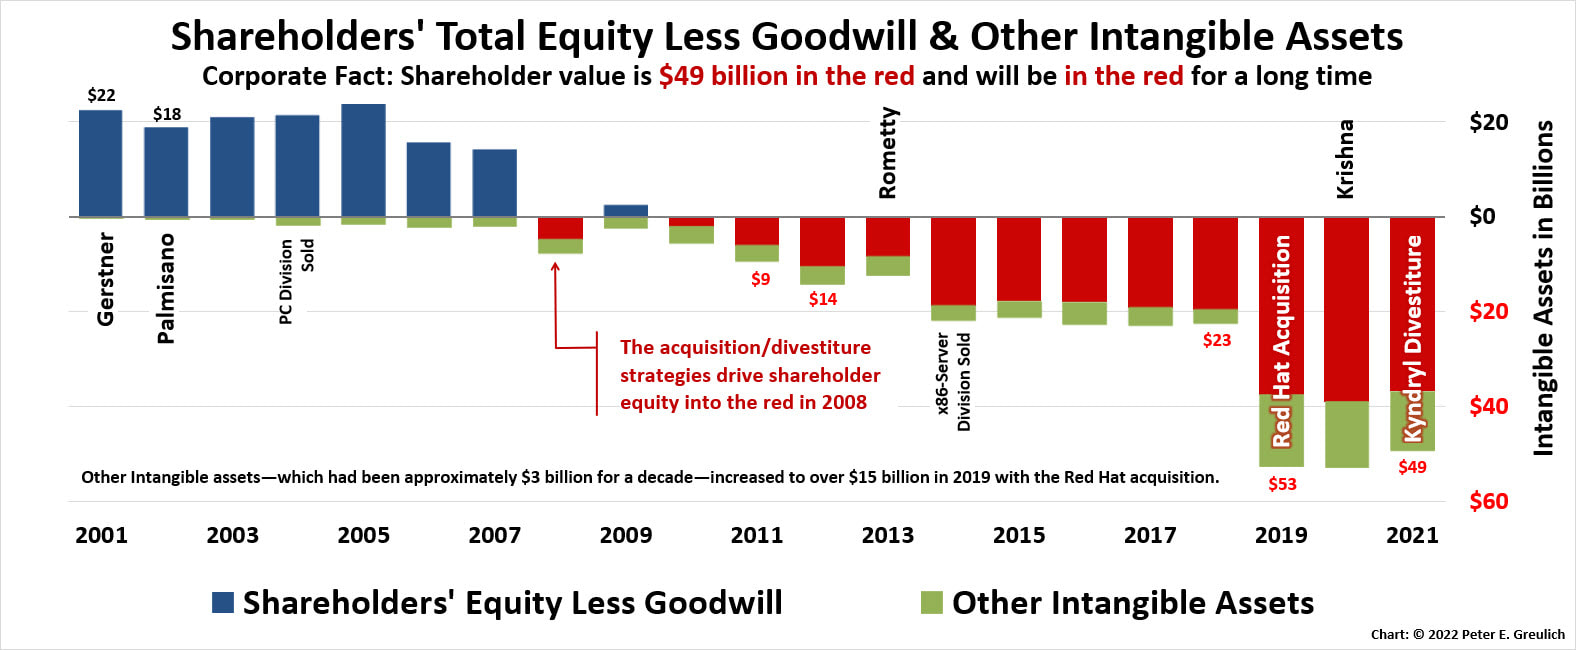 Bar chart showing IBM's yearly Shareholder Equity less Goodwill and Other Intangible Assets from 2001 through 2021.